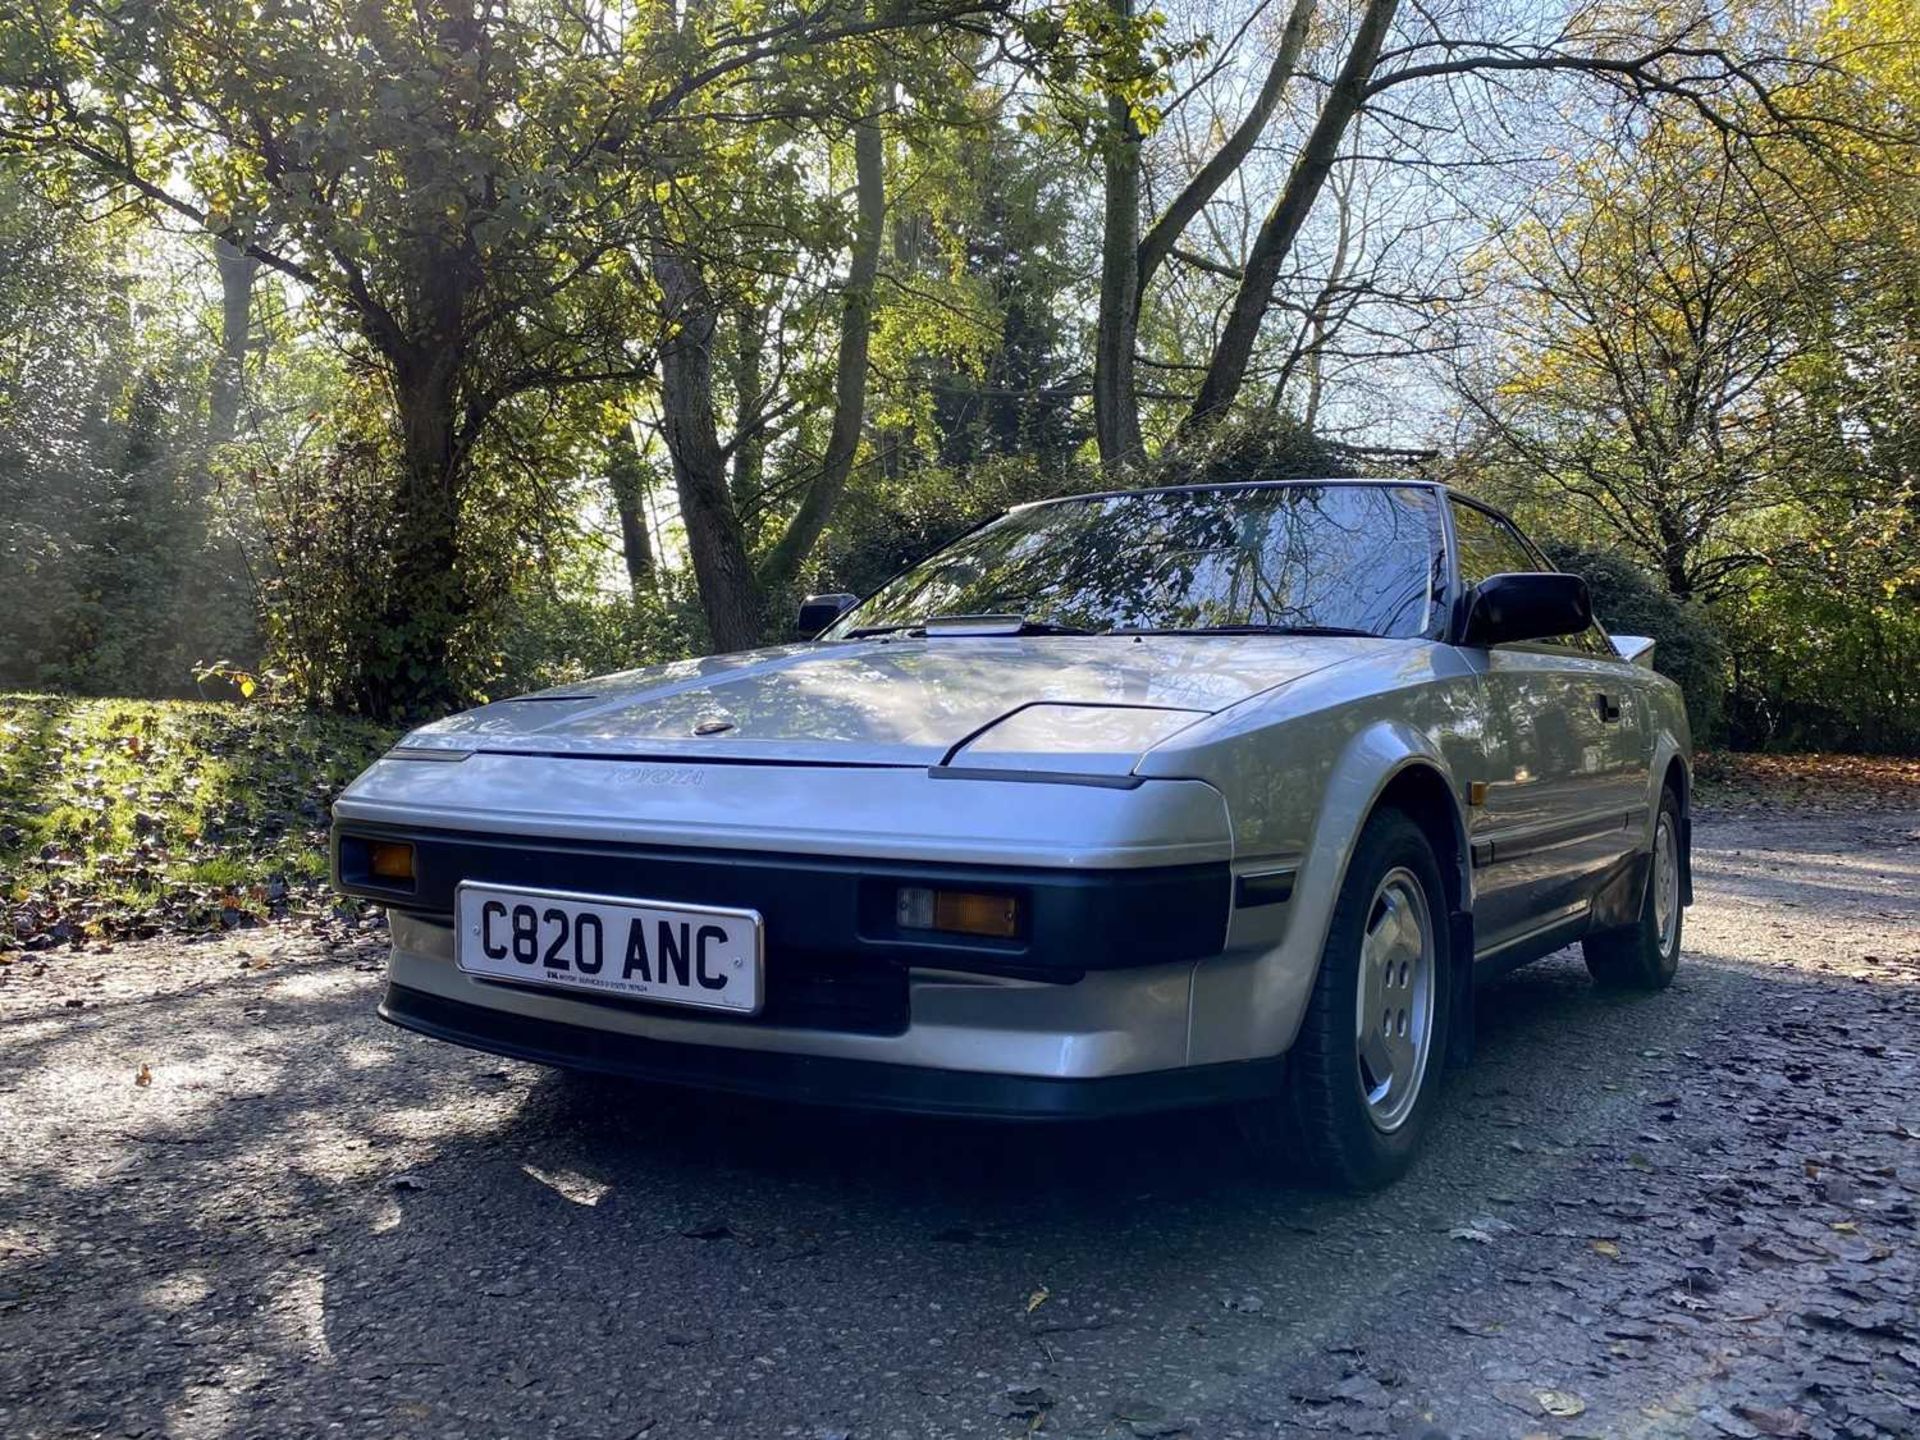 1985 Toyota MR2 Coupe Restored example of an appreciating modern classic - Image 2 of 100